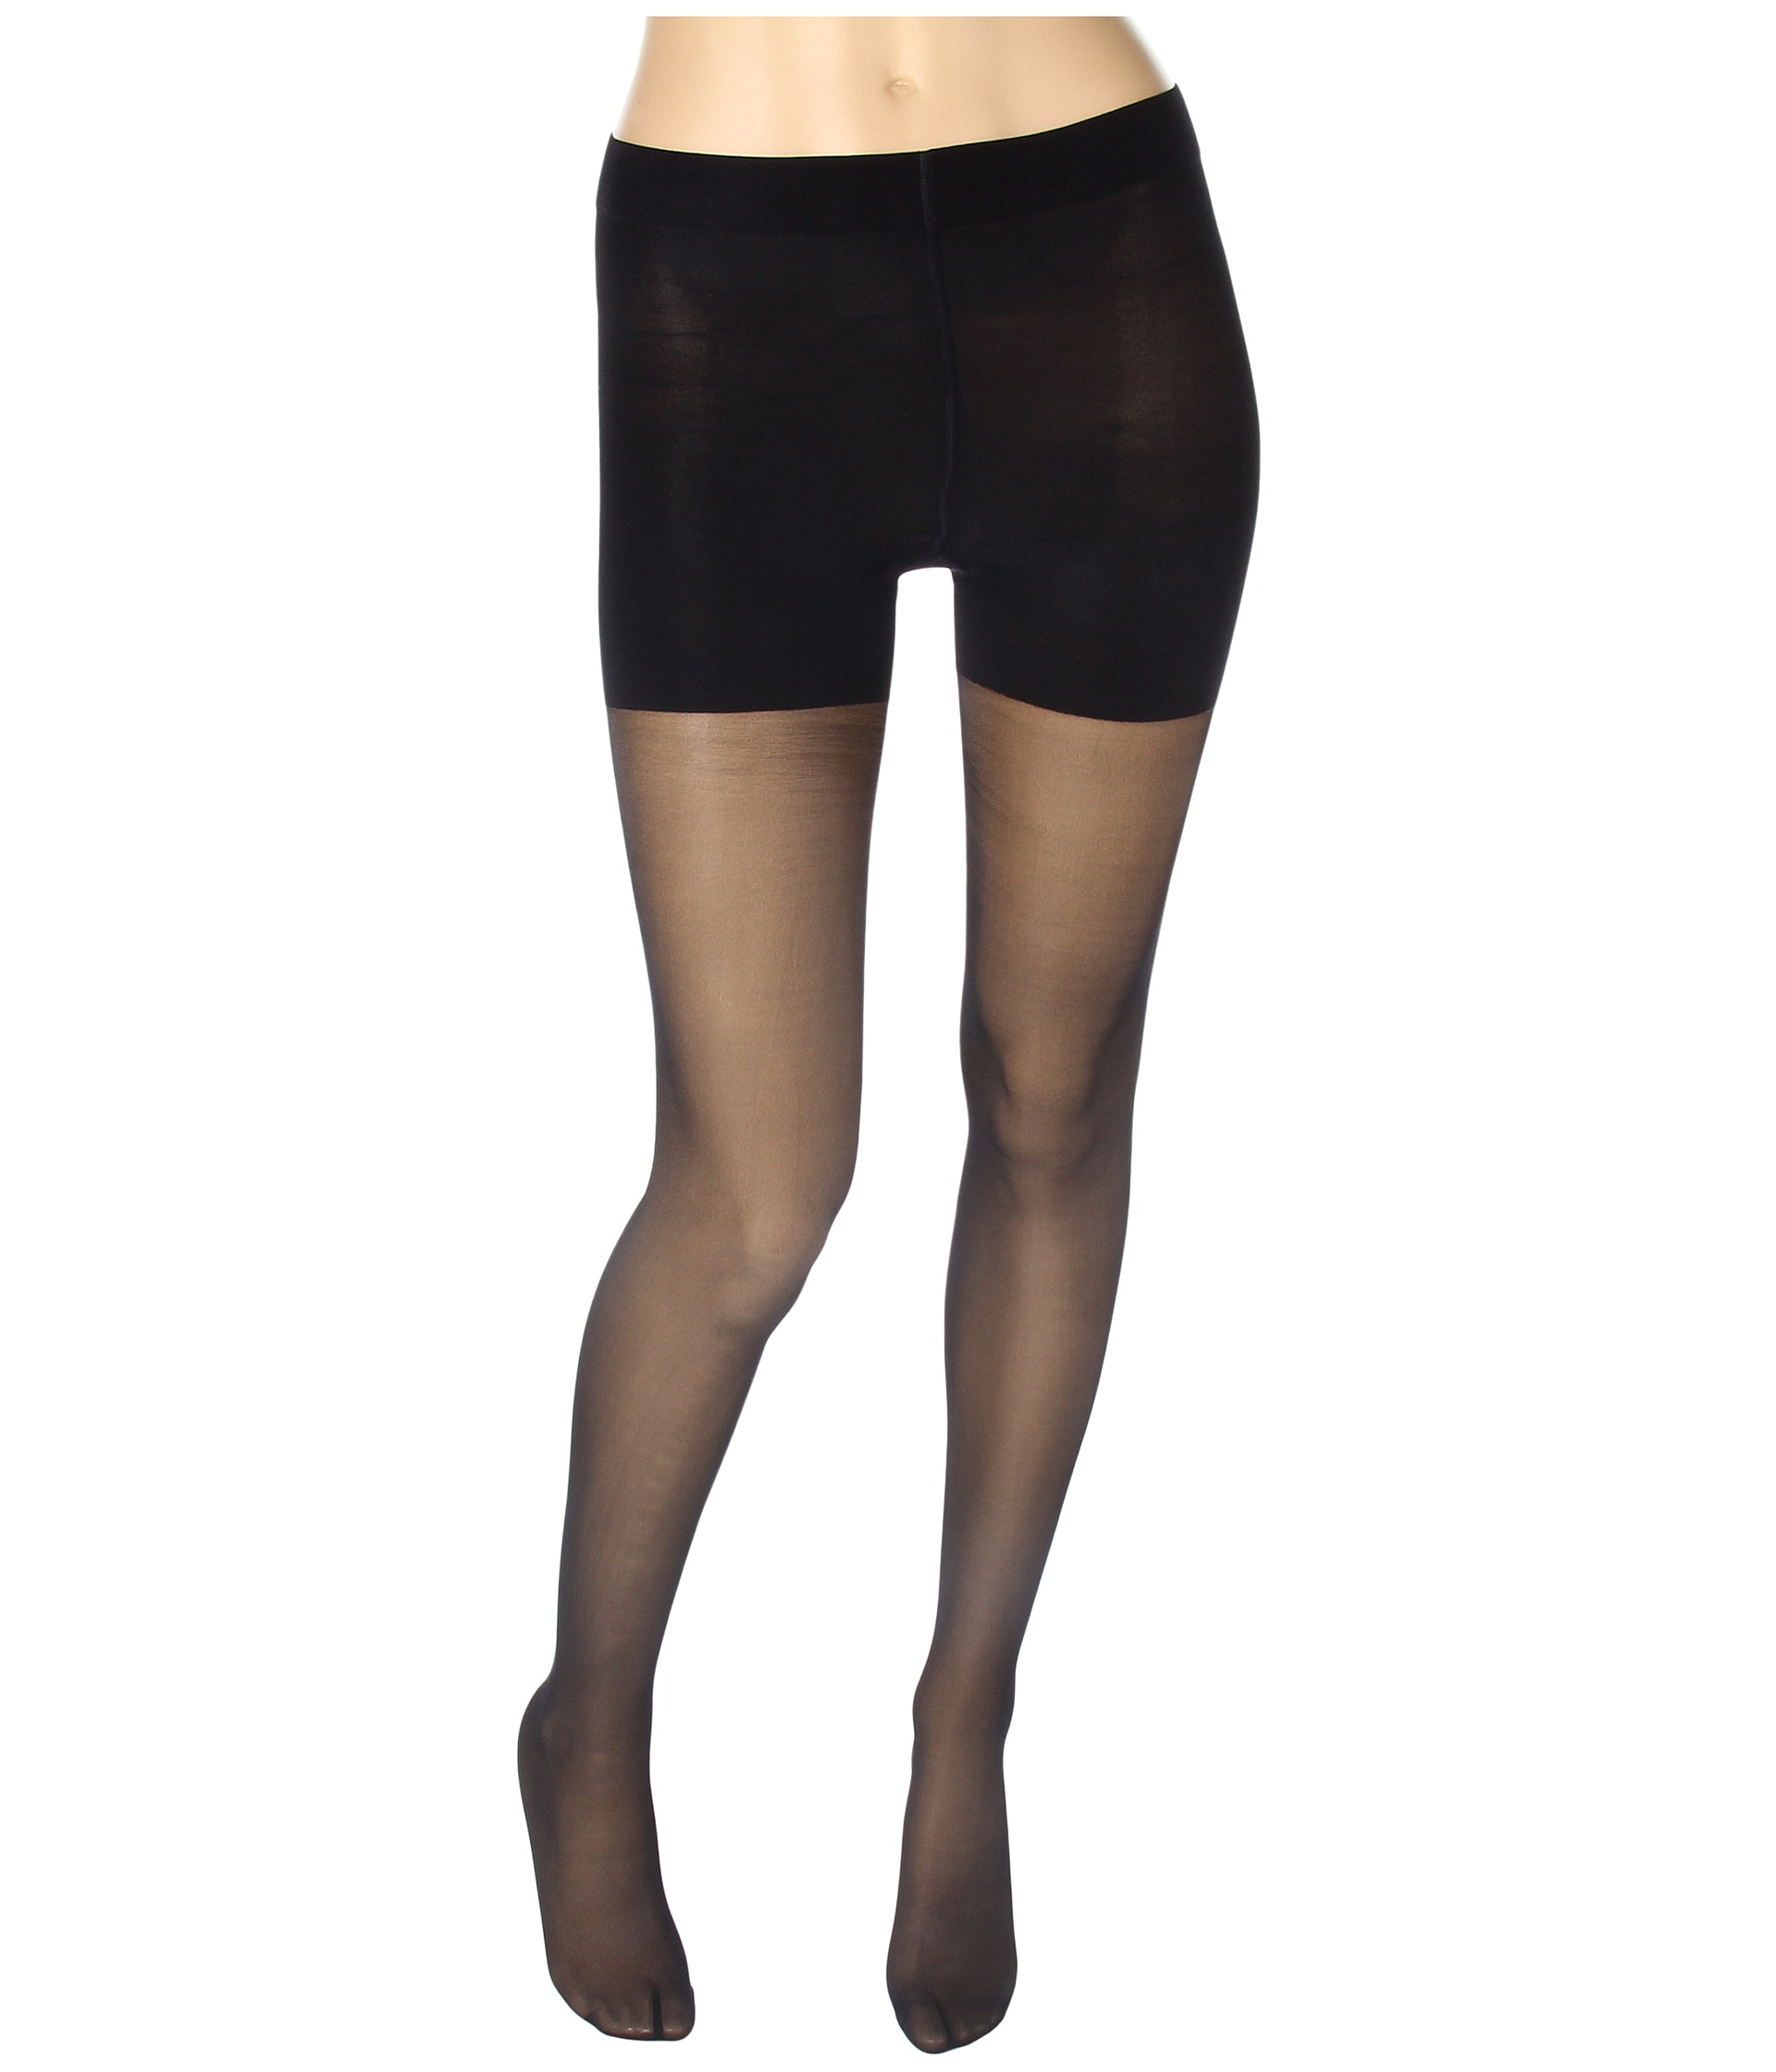 Lyst - Wolford Satin Touch 20 Control Top Tights in Black